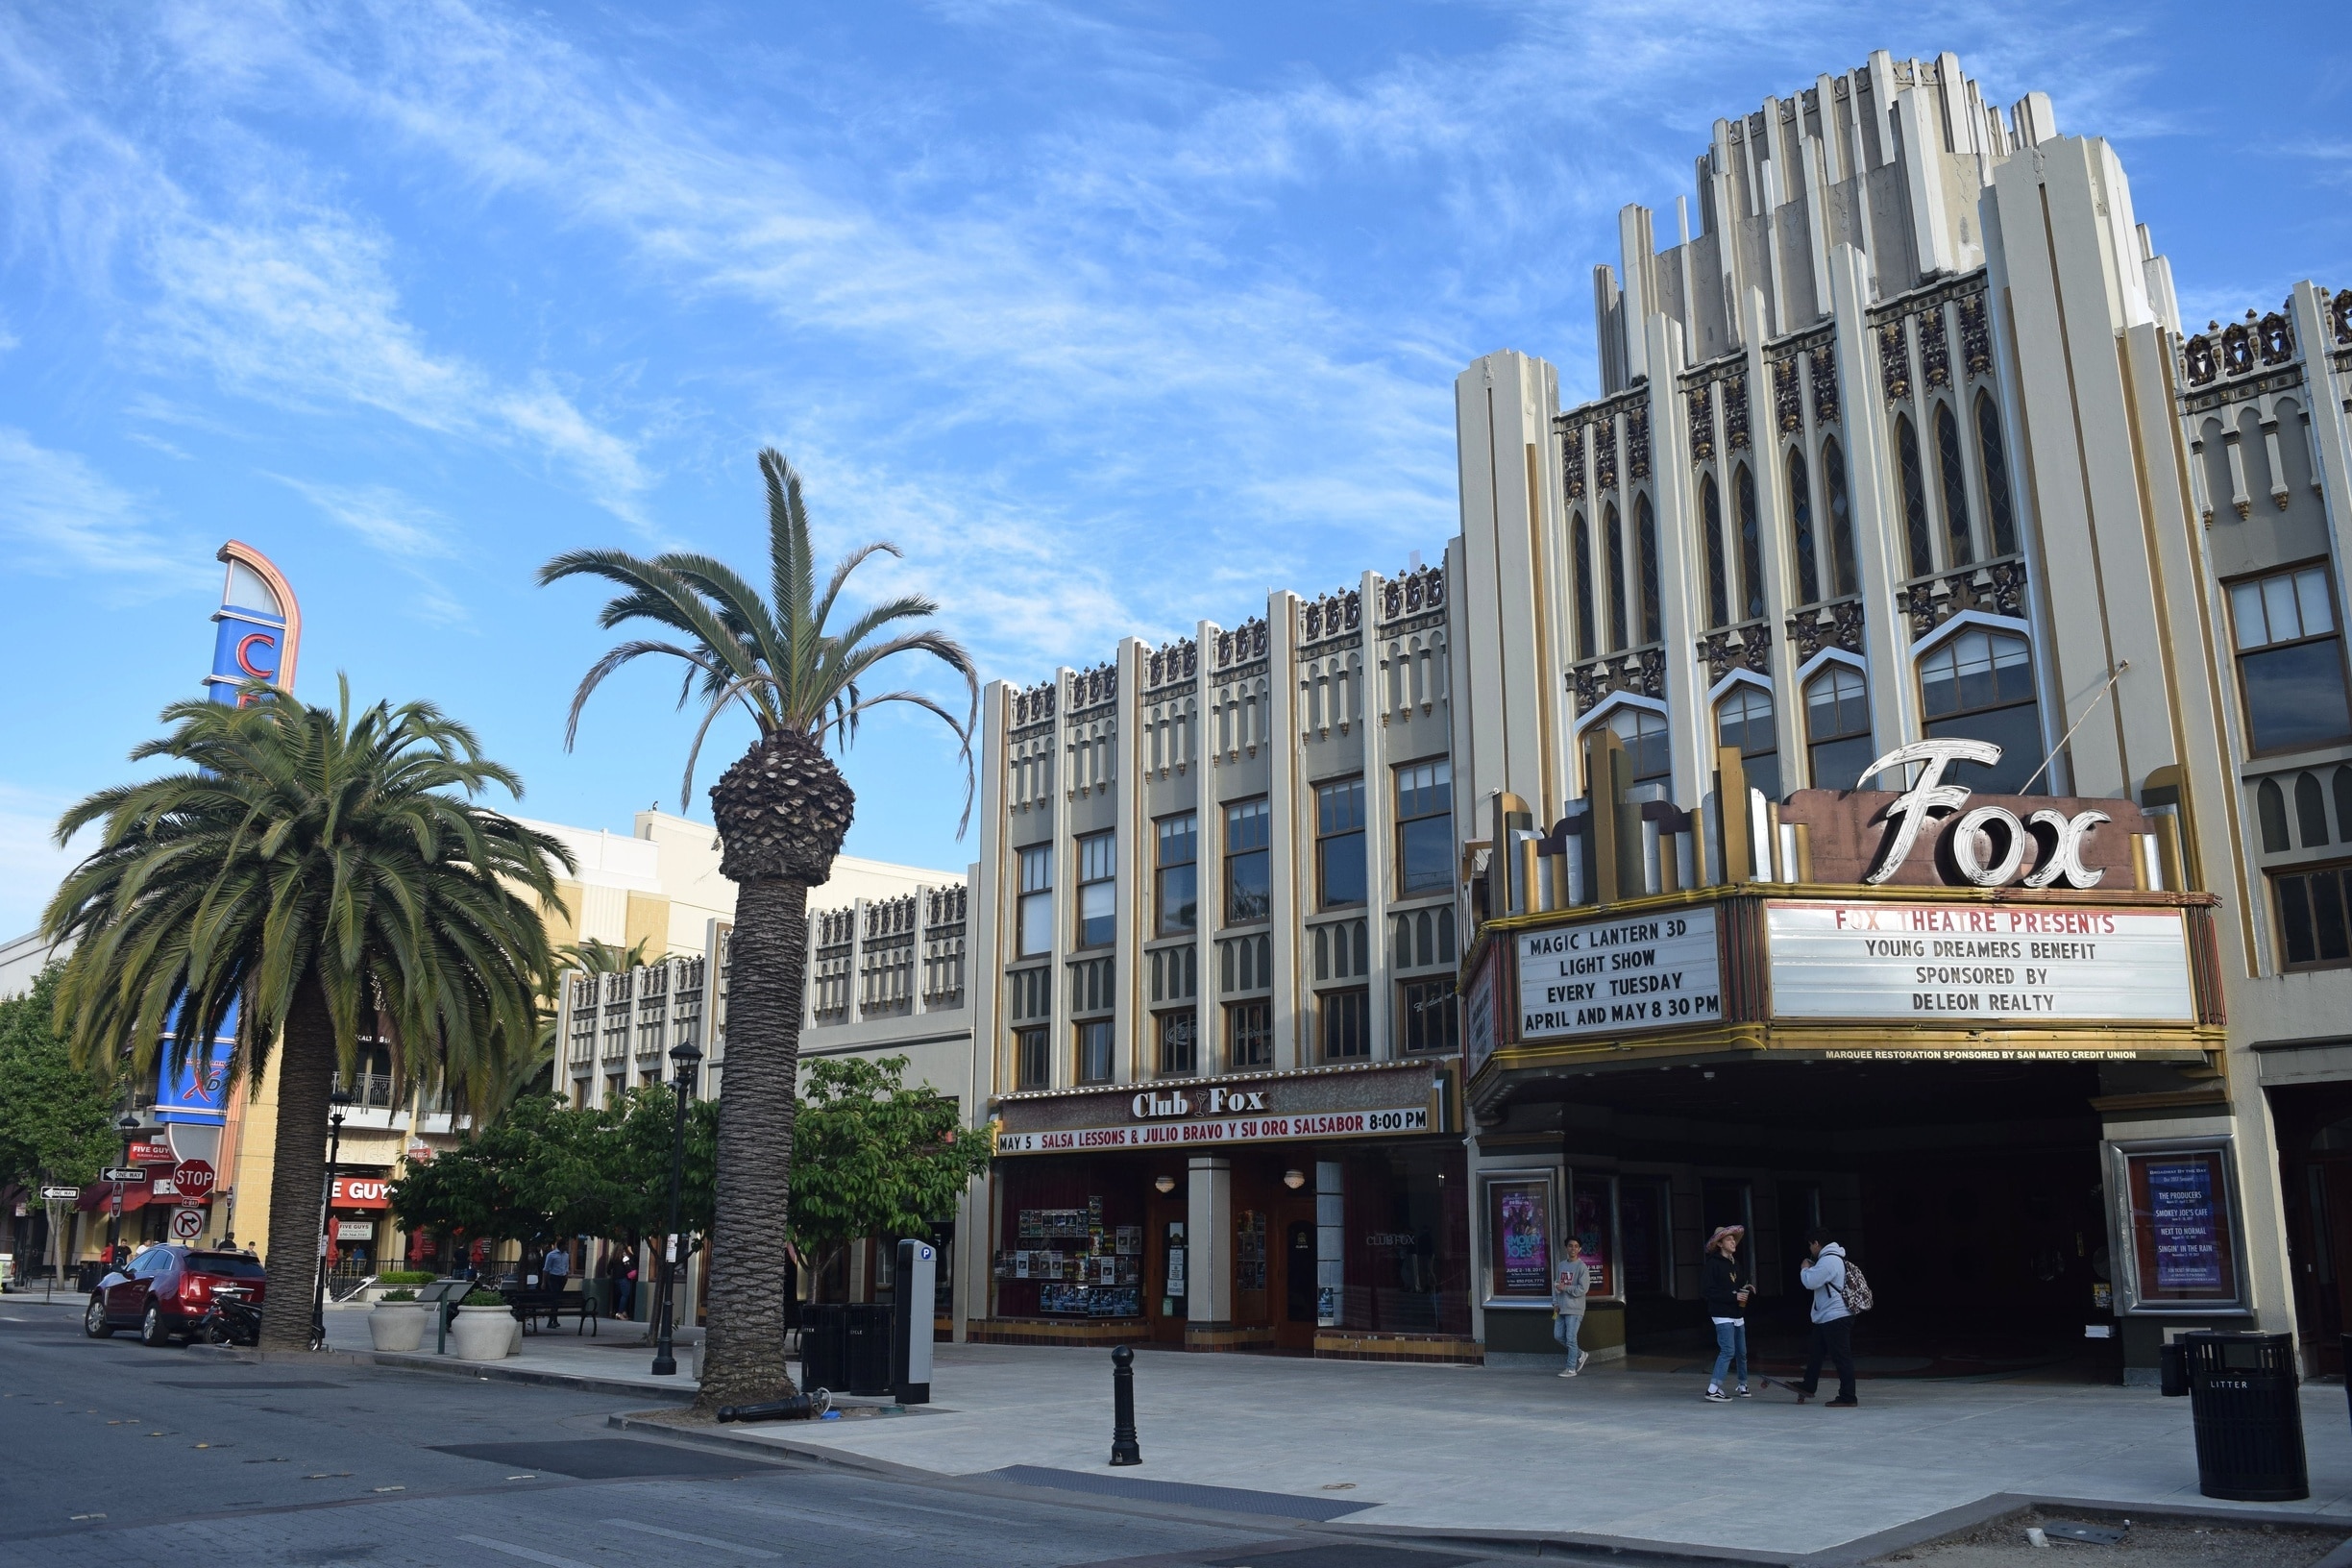 The historic Fox Theatre in Redwood City that opened in 1929 and was remodeled in 1950.
The Moorish feel and style on the inside and the Gothic feel on the outside clearly tells why this iconic place was inducted to the National Register of Historic Places.